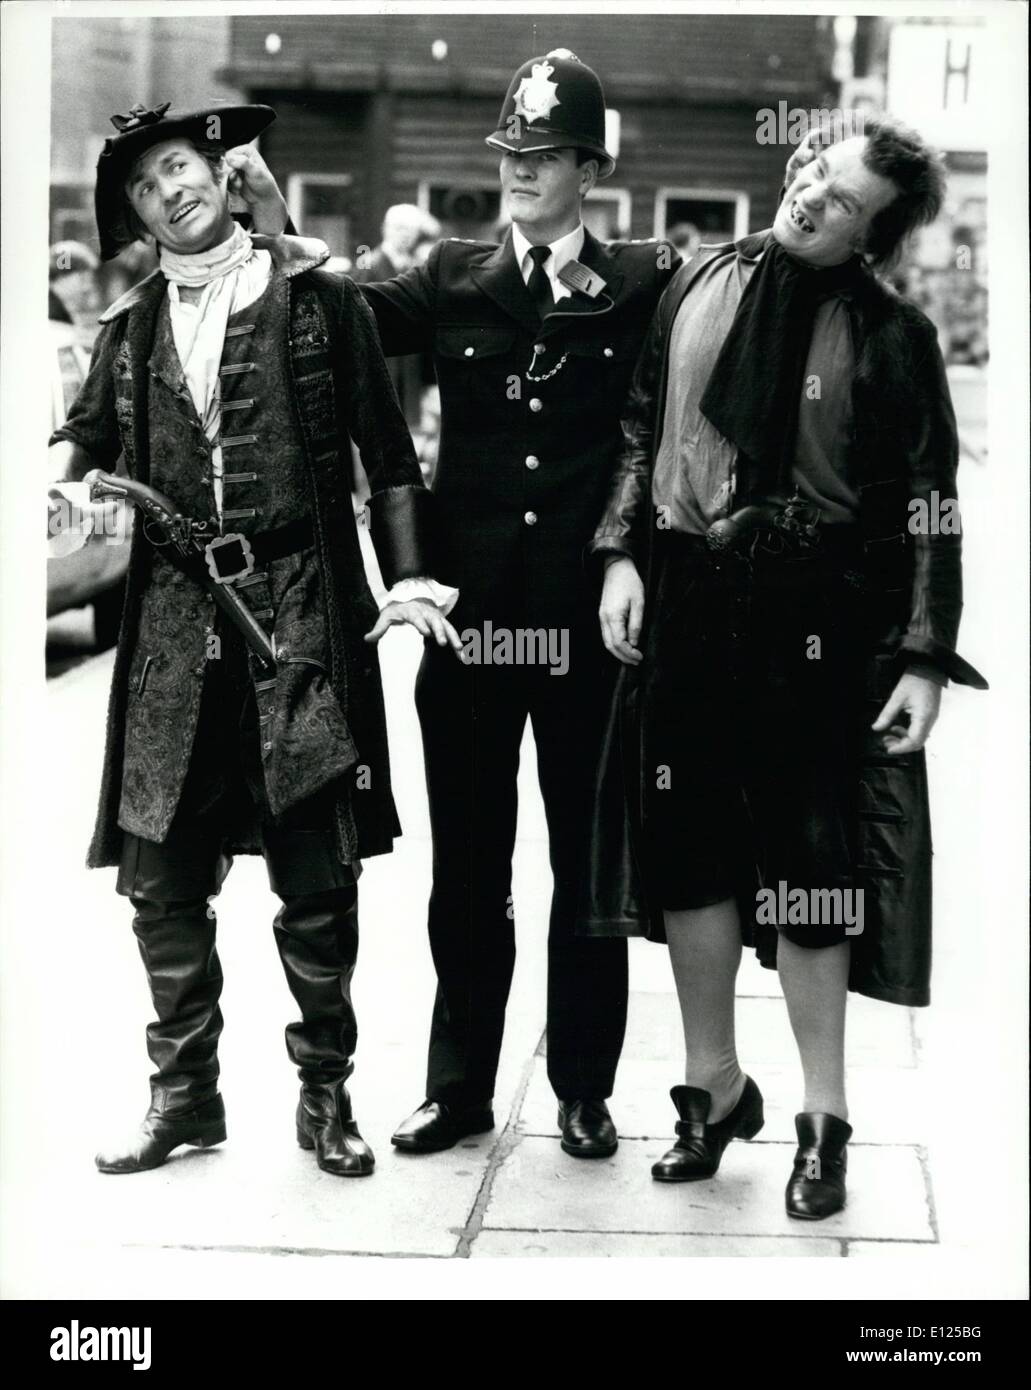 Sep. 09, 1991 - Fair Cop: Scottish Opera has brought its highly acclaimed Edinburgh Festival production of the Begger's Opera to the Dominion Theater, London. The Opera opened last night for a limited run of only ten days. The Beggers Opera which is based on the low life of eighteenth century London was first performed at the Loncolns Inn Theater in 1728 and is often considered the ancestor of the American musical Stock Photo